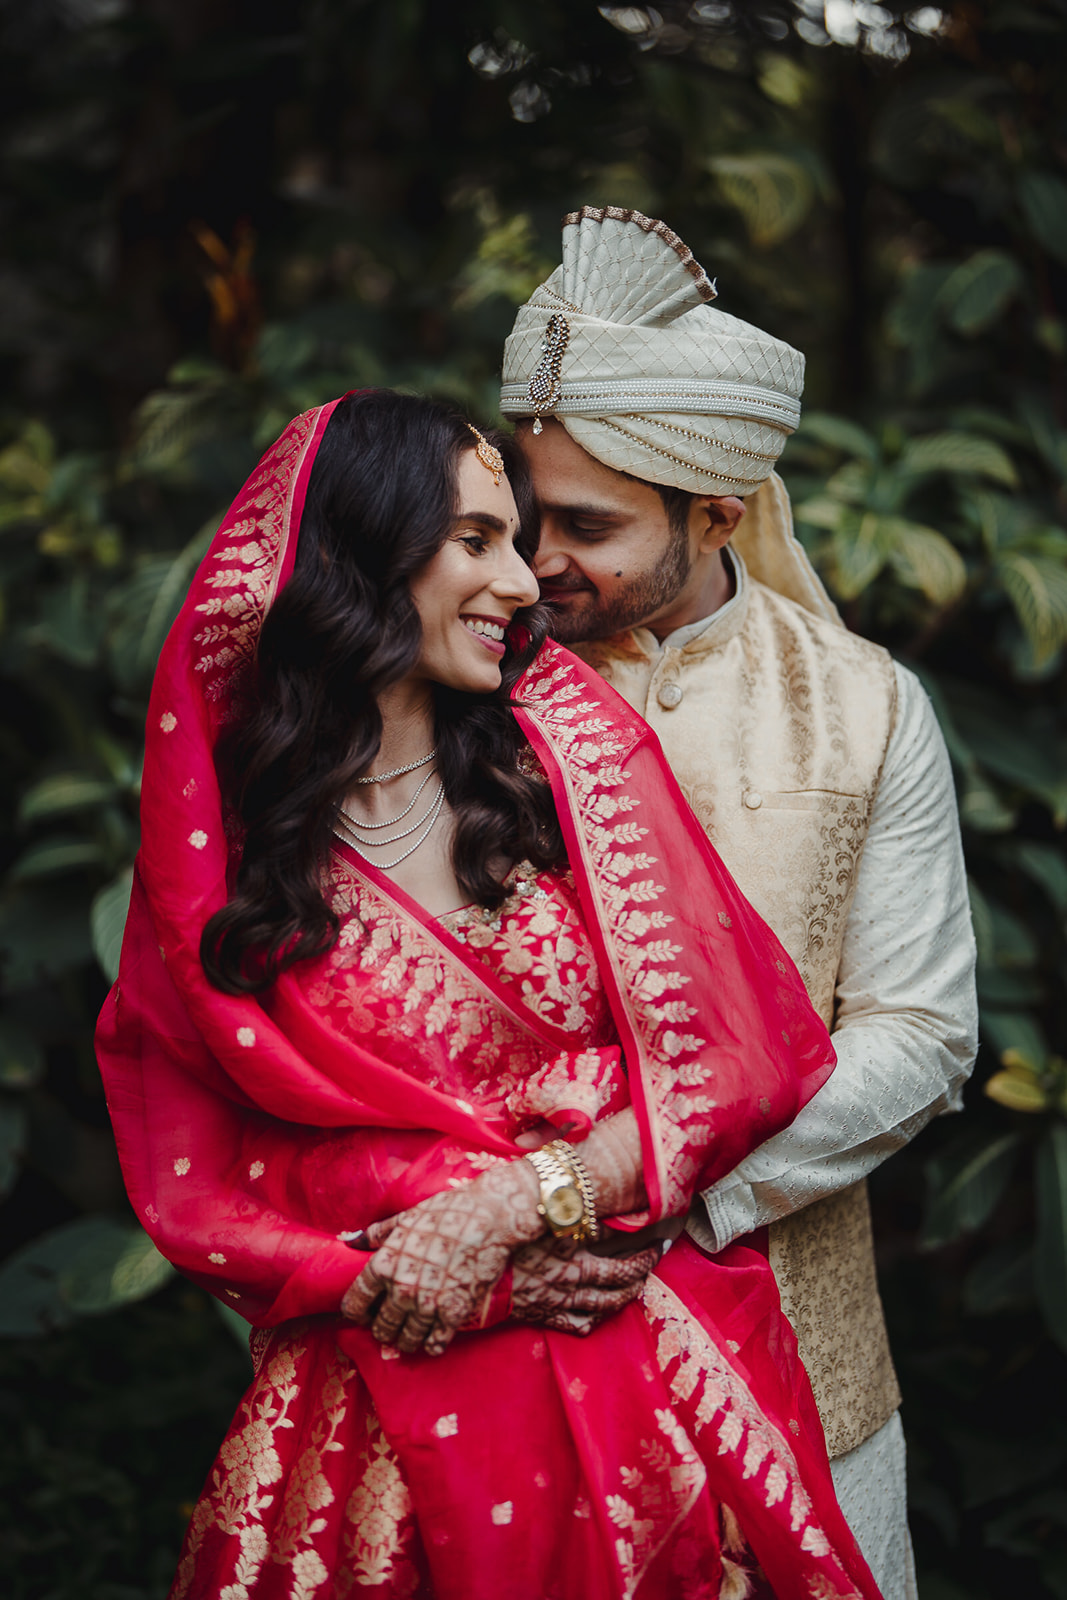 Artful wedding couple photosession showcases love and connection